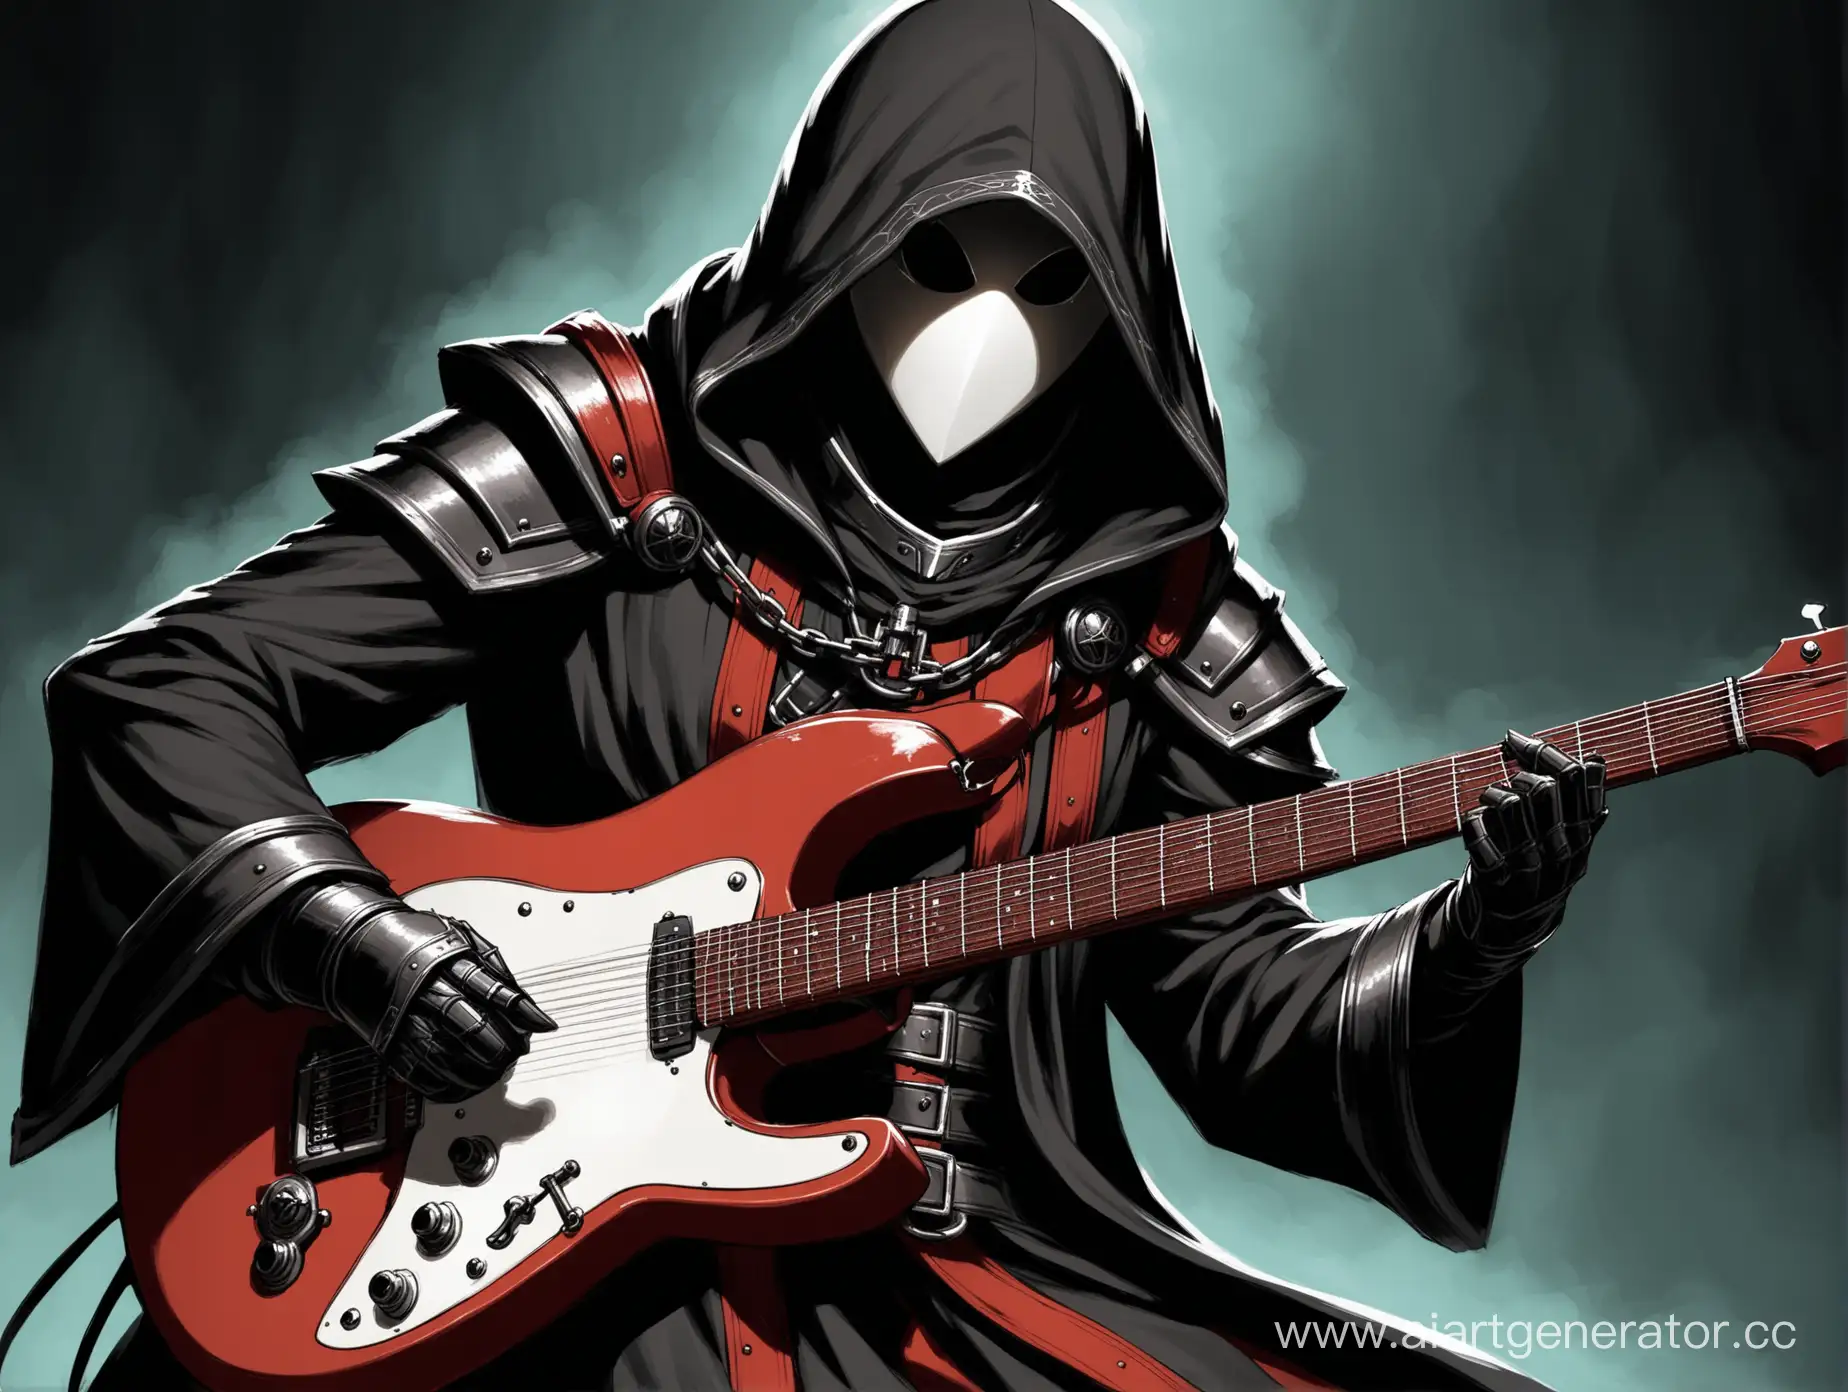 Inquisitor, playing guitar, wearing a hood, no face visible